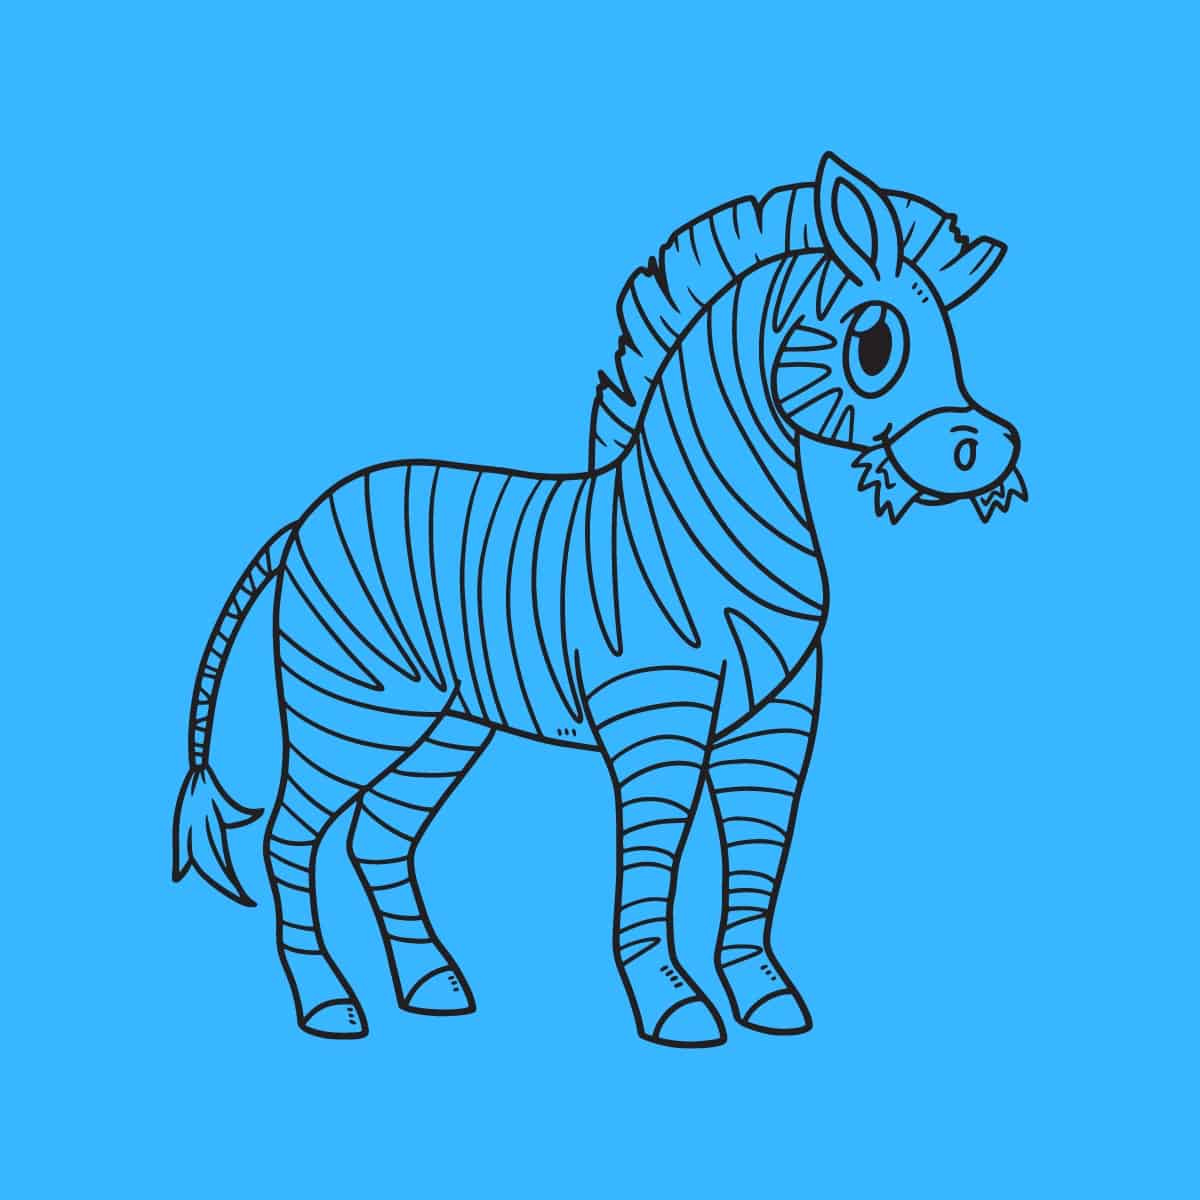 Cartoon graphic of a black outlined zebra with stripes on a blue background.